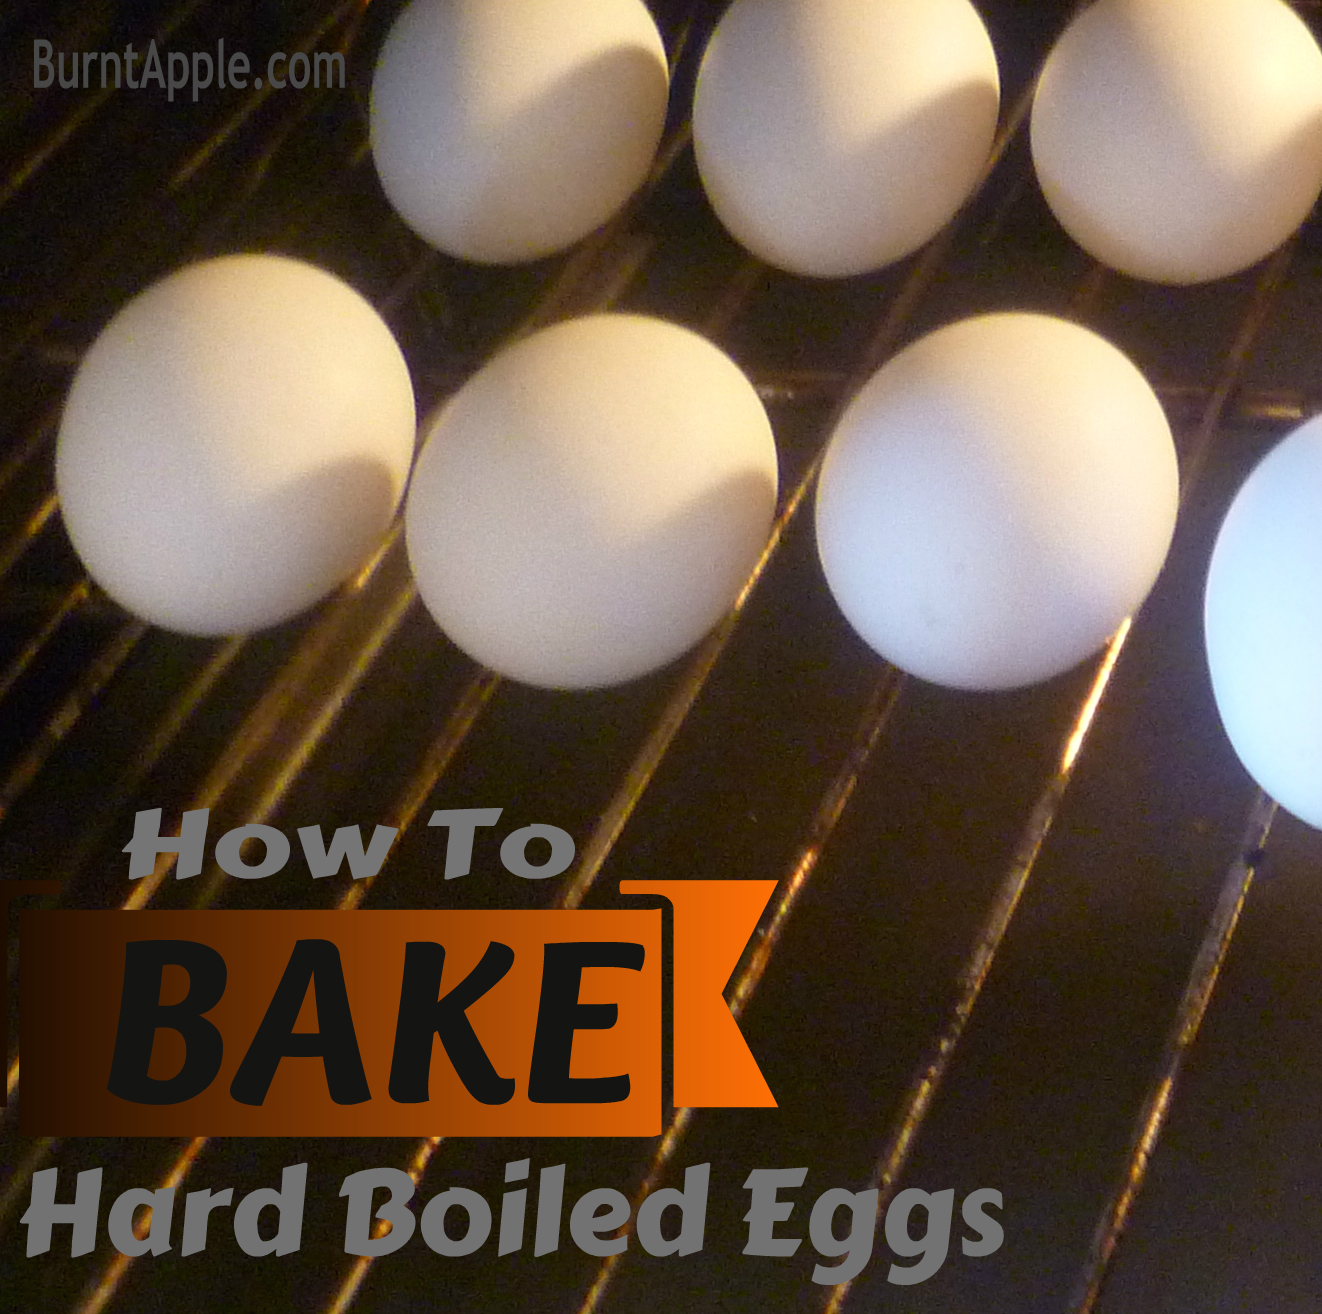 {Trying It Tuesday} How to Bake A Hard Boiled Egg